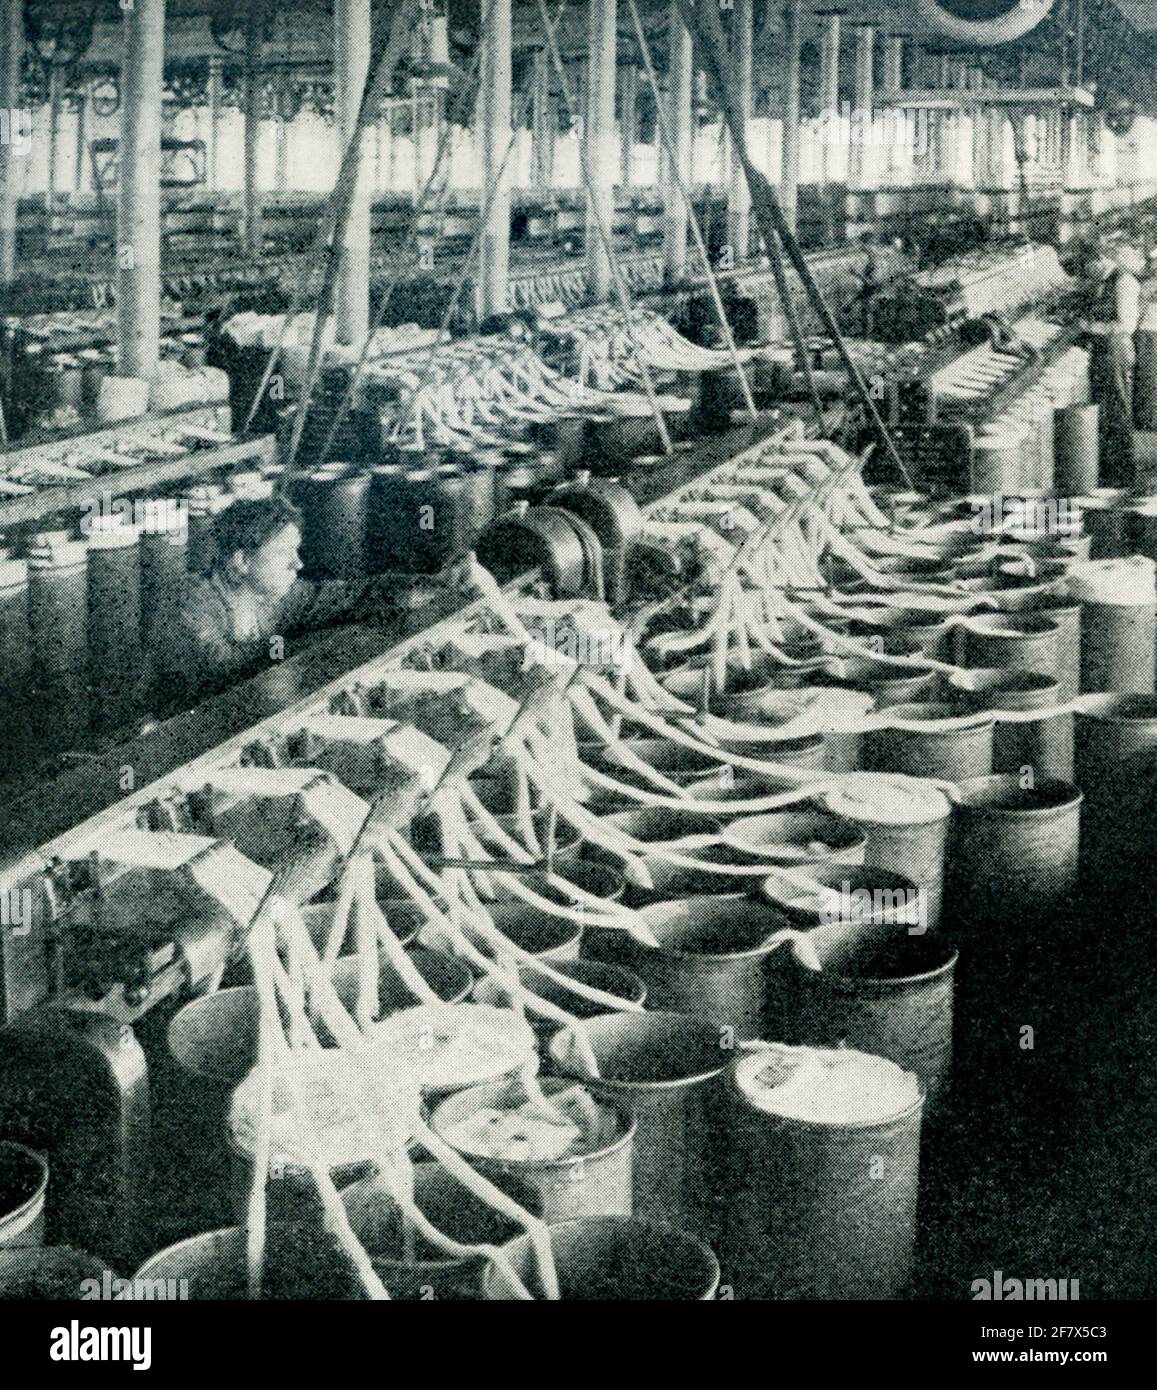 This 1903 photo shows the interior of a cotton mill. Stock Photo